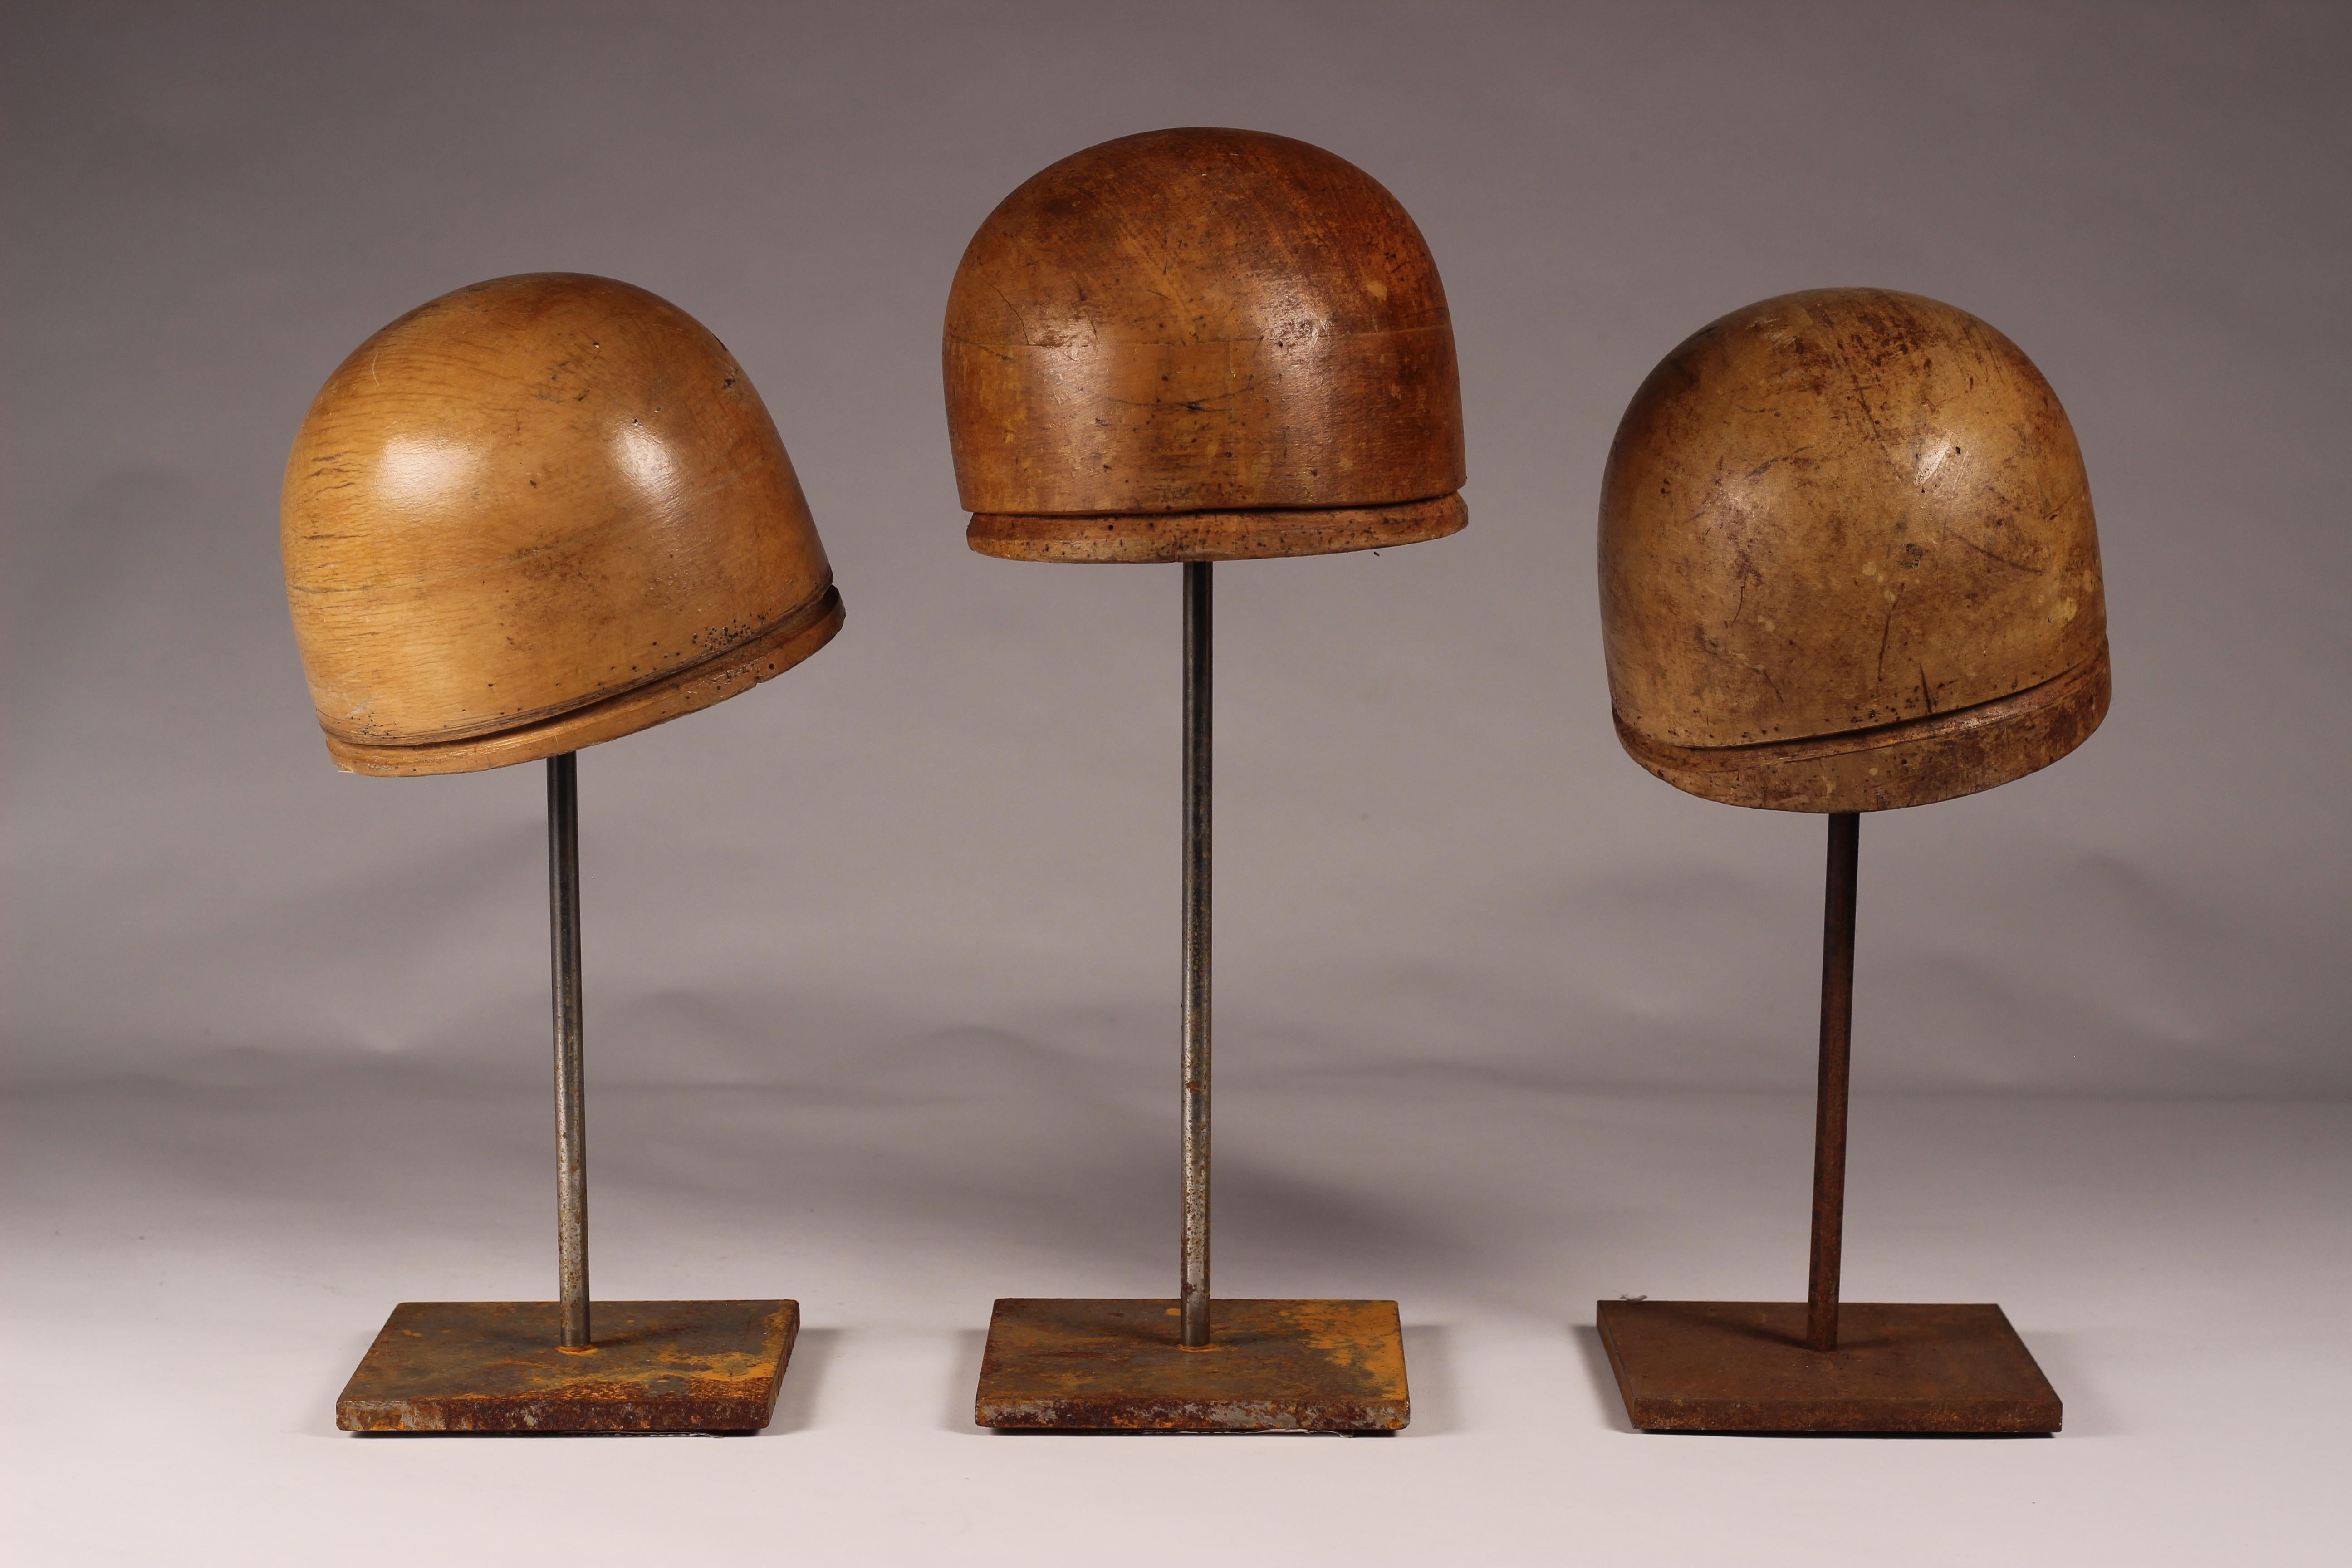 A collection of 3 Milliner hat blocks/molds from the well known hat makers of Florence, Italy. Mounted on a oxidised steel bases with protective Felt bases.